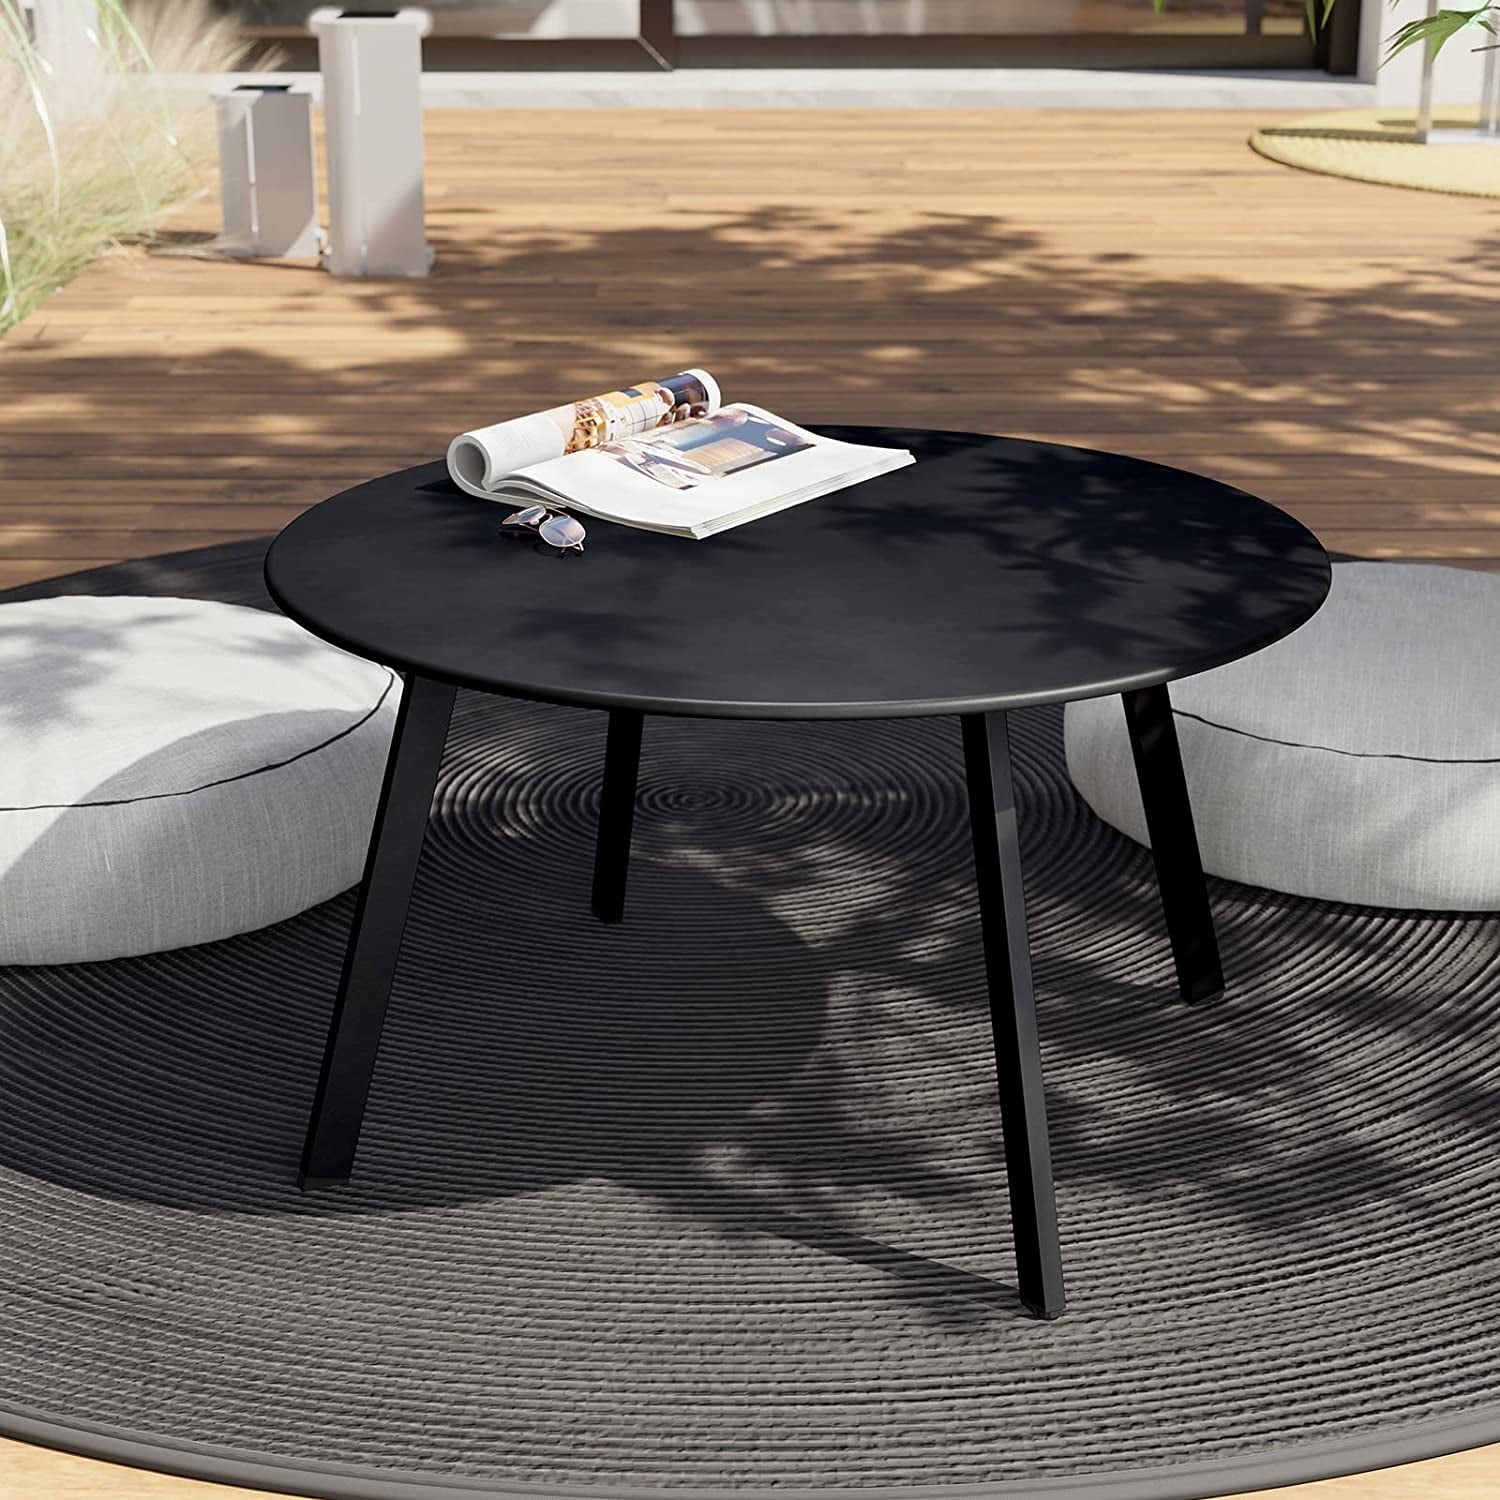 Outdoor Tables - Bed Bath & Beyond